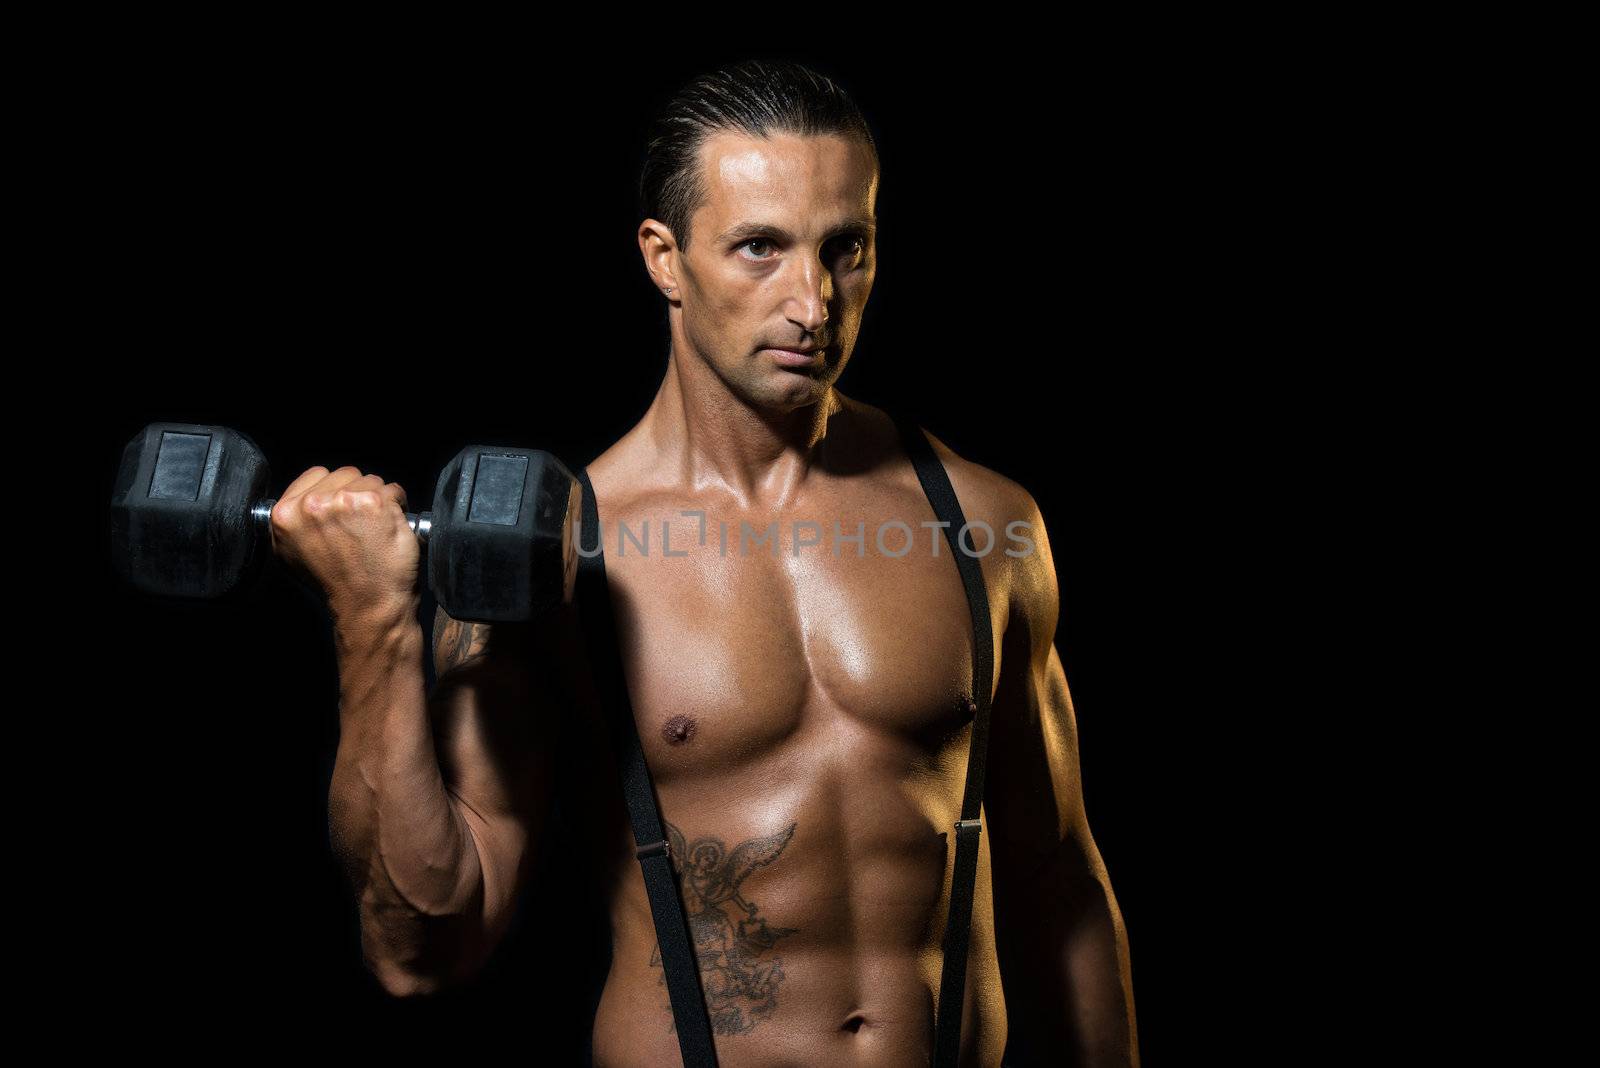 Powerful muscular man lifting weights by JalePhoto